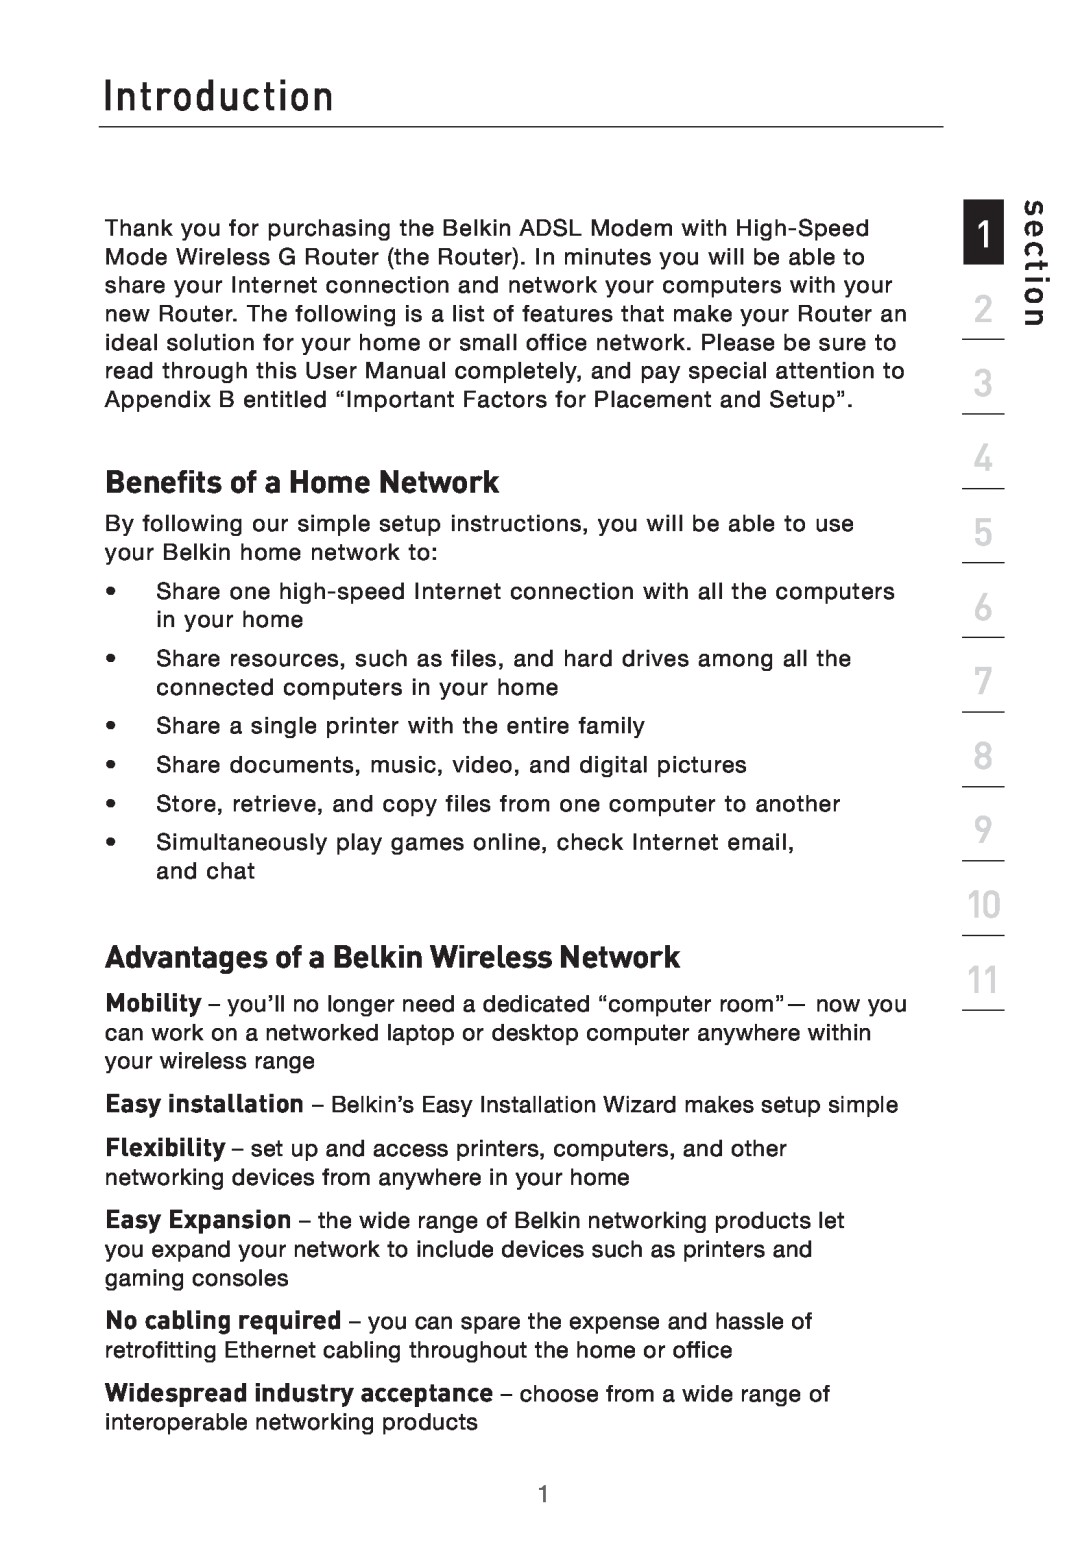 Belkin Pre-N manual Introduction, section, Benefits of a Home Network, Advantages of a Belkin Wireless Network 